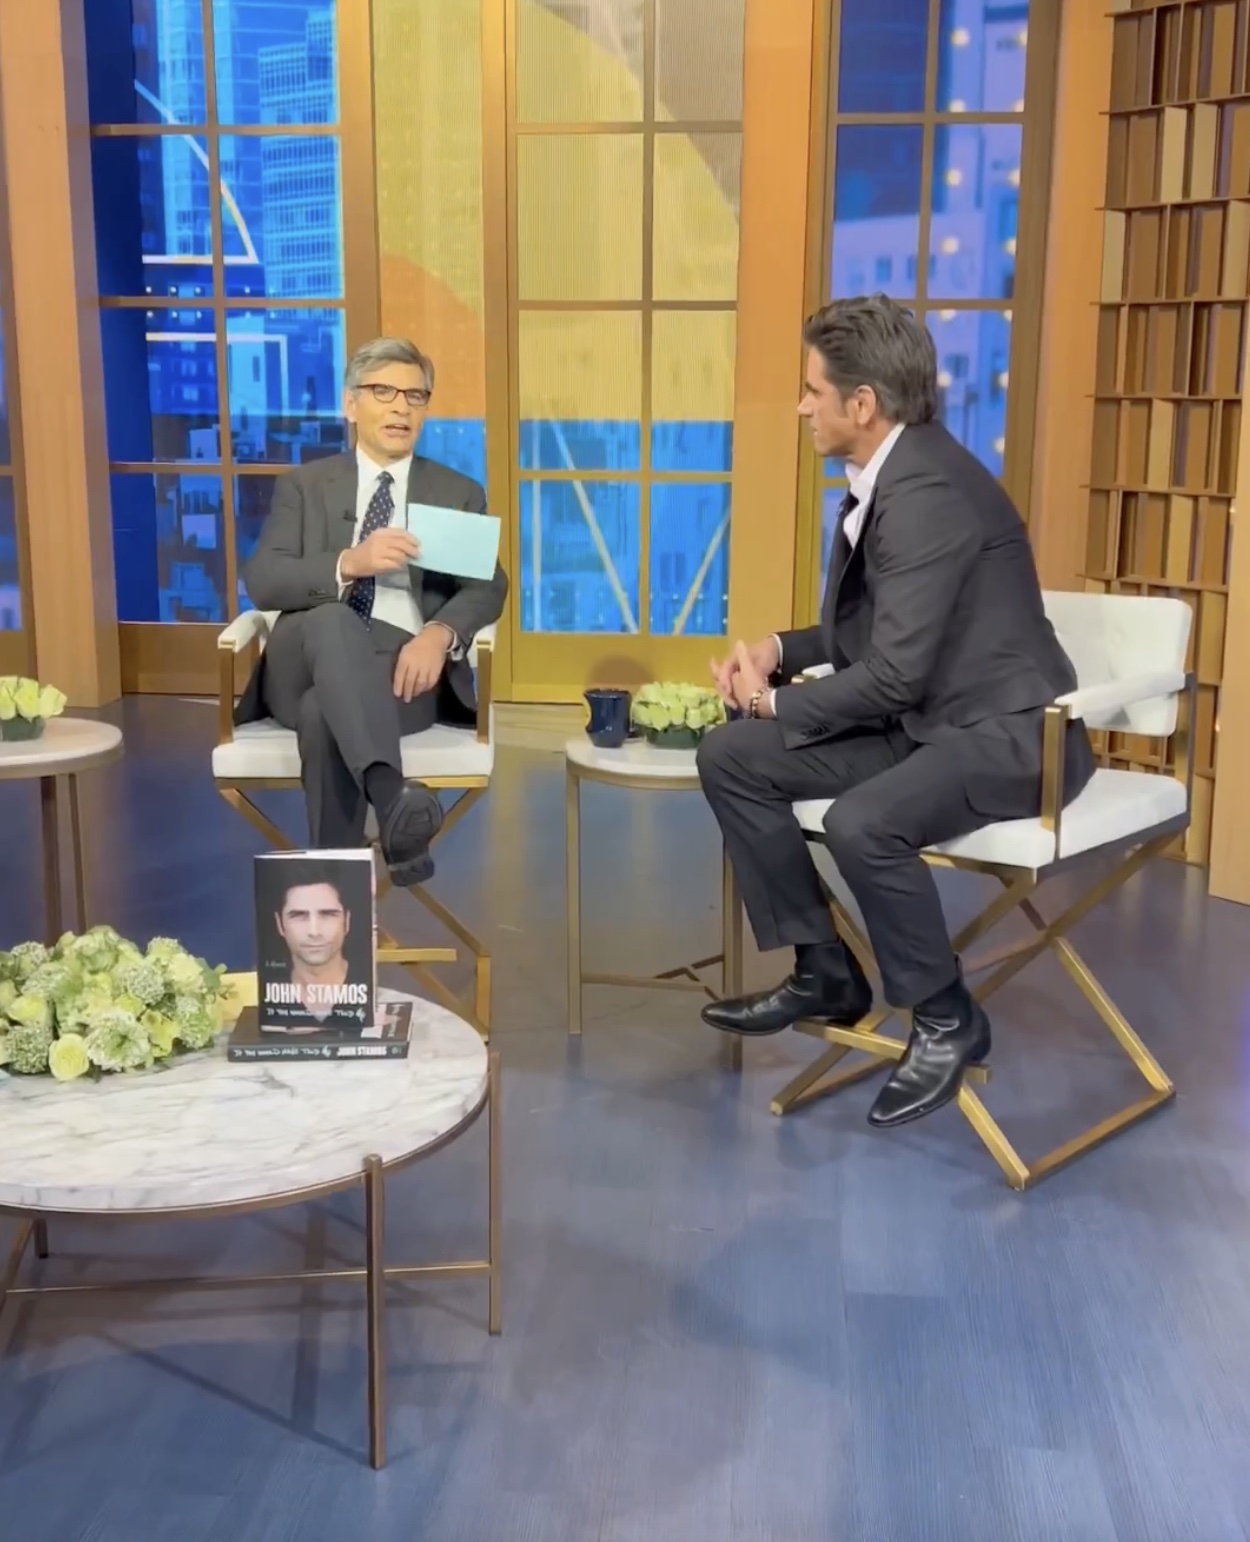 John Stamos appeared on the morning show, begging him to 'run for president'